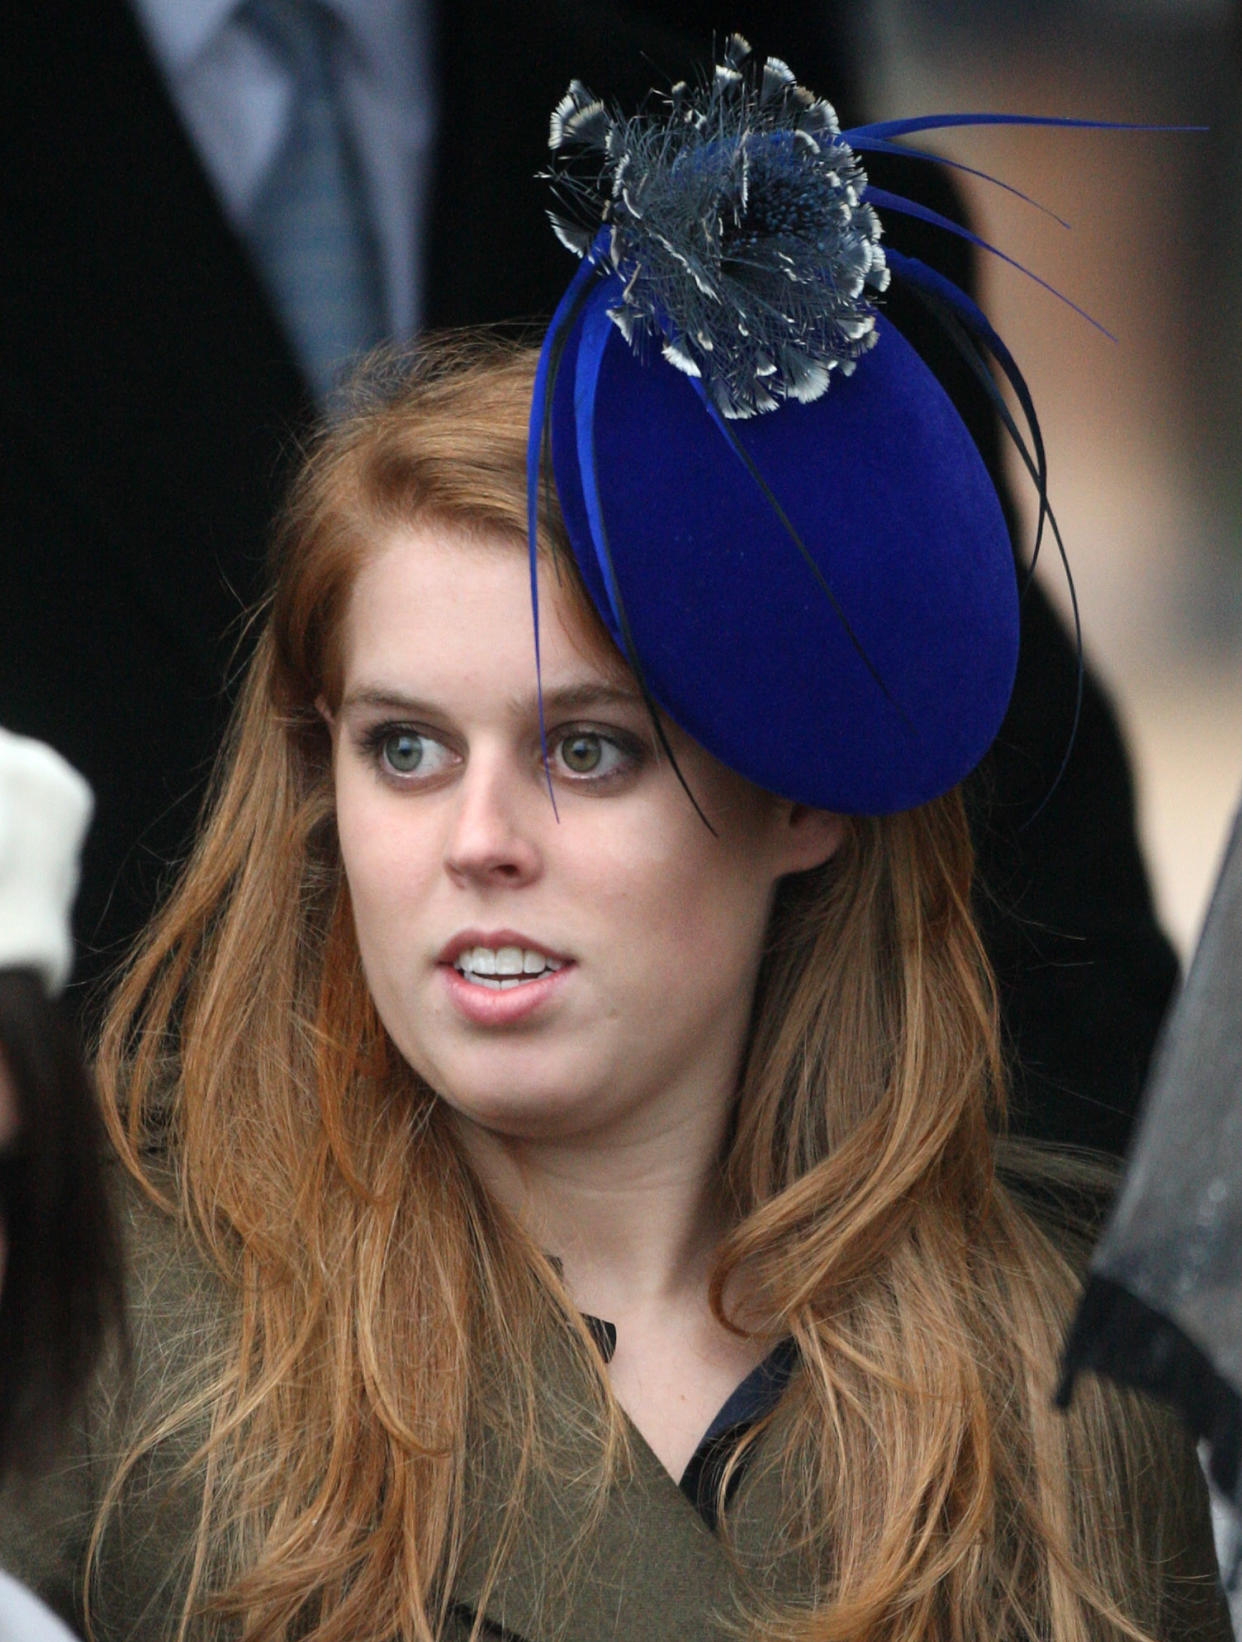 Princess Beatrice Attends Christmas Day Service At Sandringham Church. (Photo by Mark Cuthbert/UK Press via Getty Images)